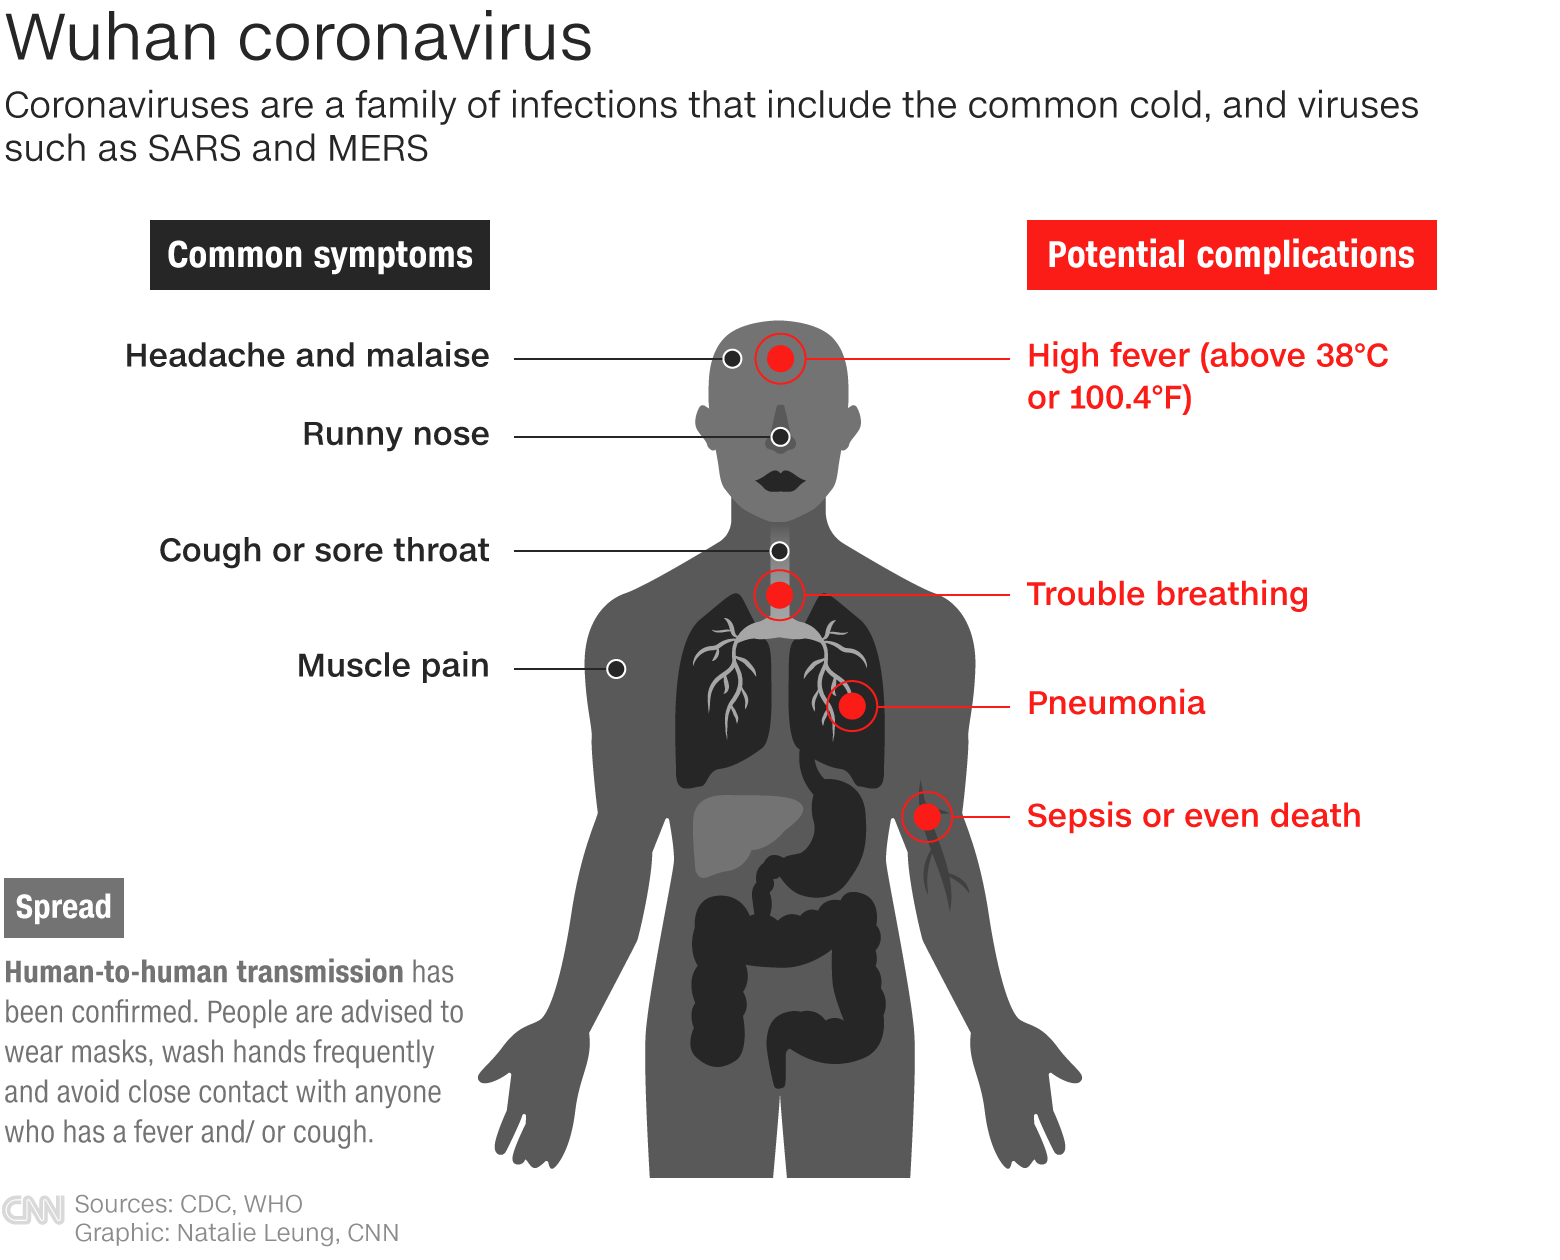 Here's how to protect yourself from the Wuhan coronavirus